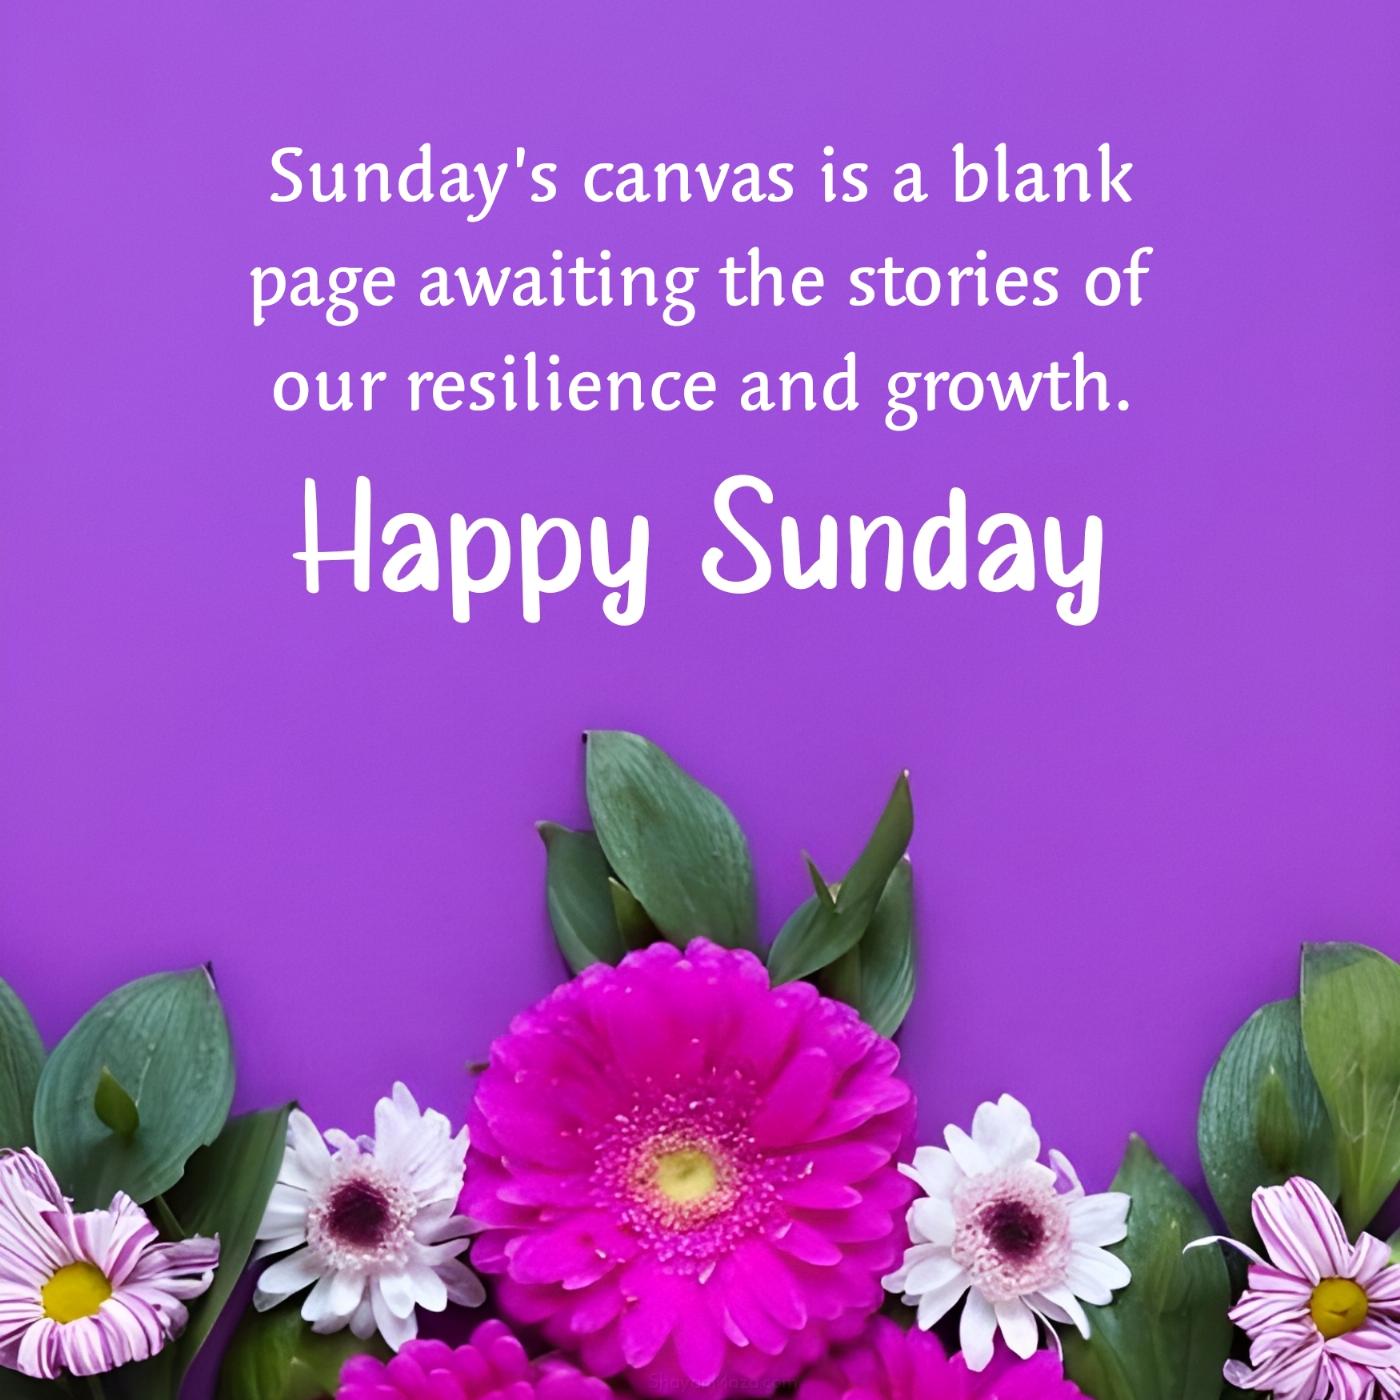 Sundays canvas is a blank page awaiting the stories